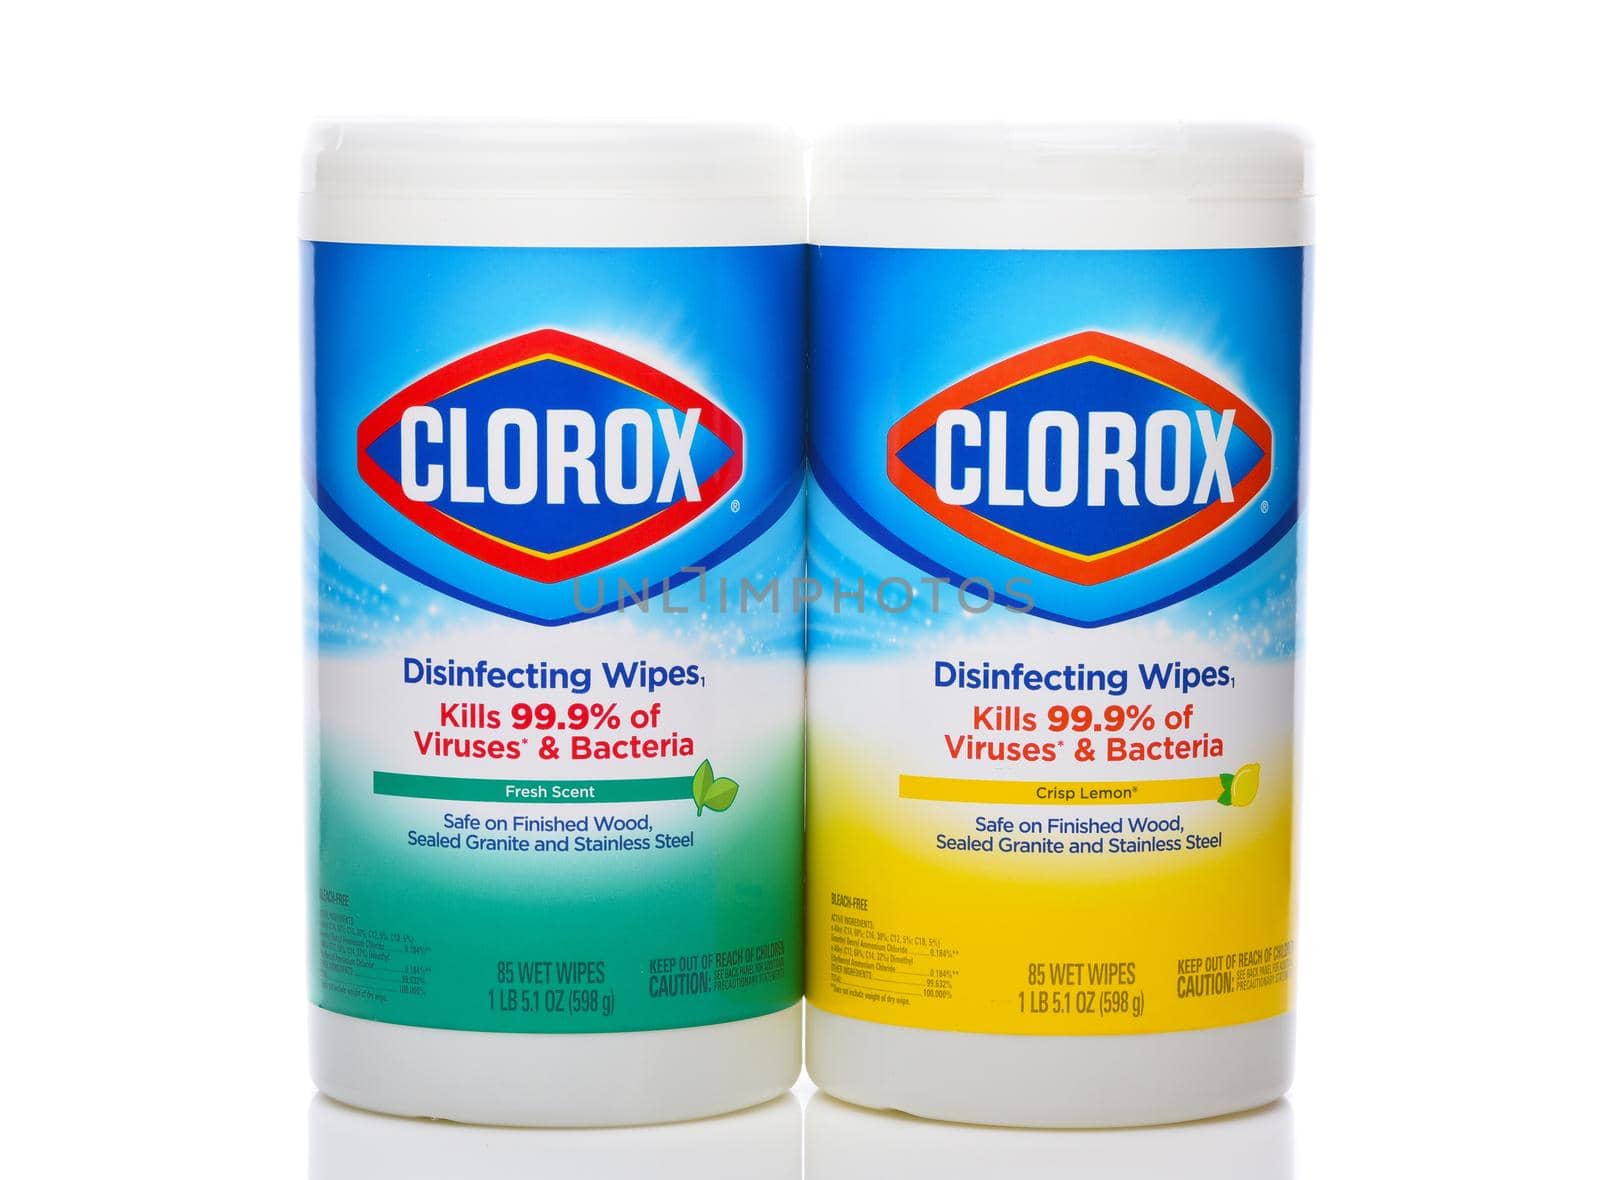 IRVINE, CALIFORNIA - 26 APRIL 2020:  Two Packages of Clorox Disinfecting Wipes, Fresh Scent and Crisp Lemon, to kill Bacteria and Viruses. by sCukrov